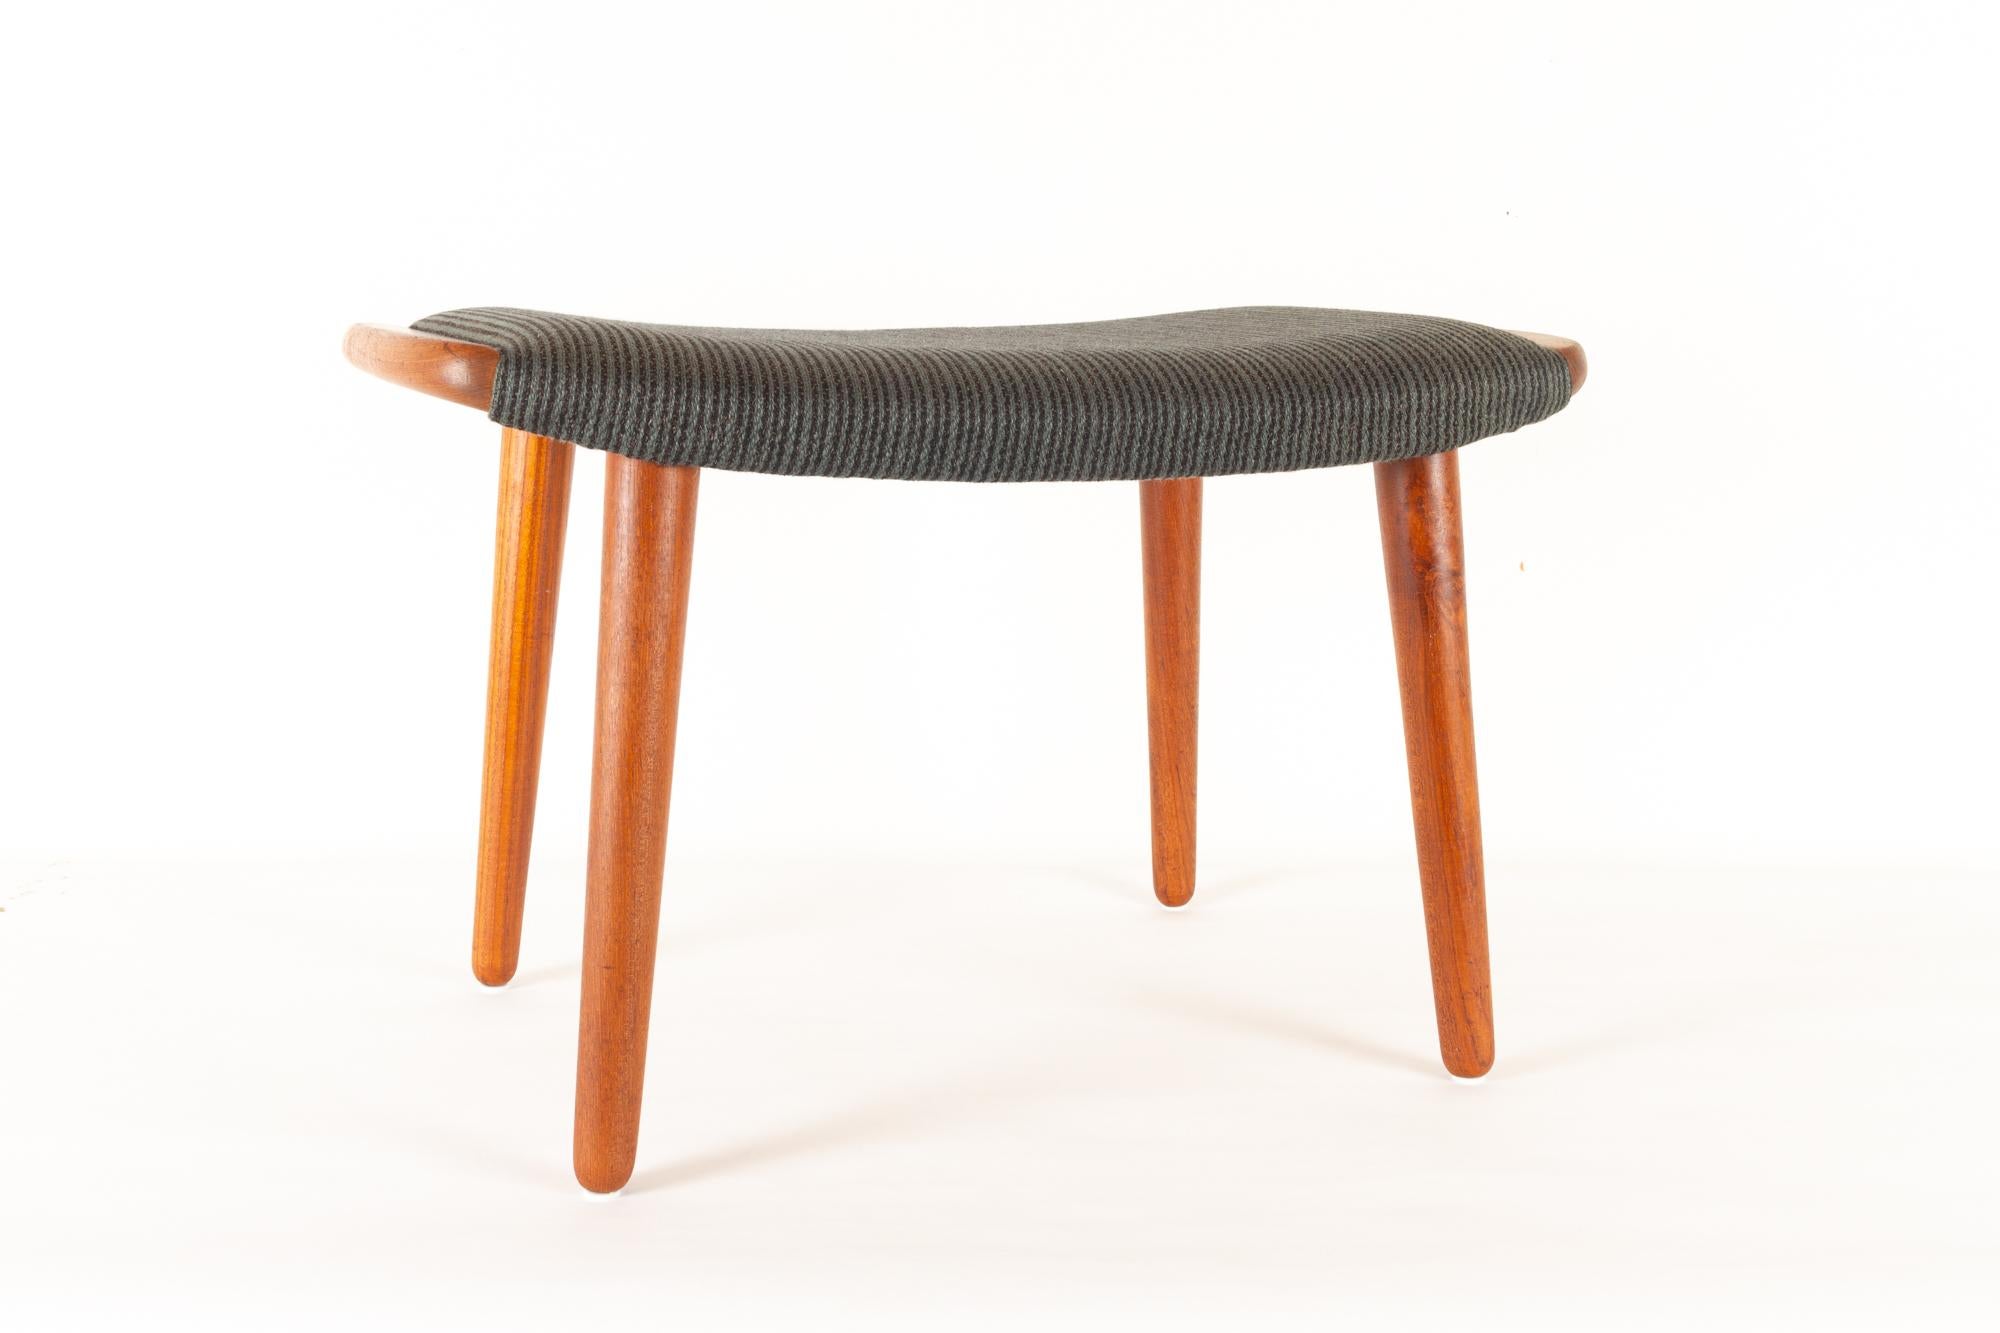 Vintage Danish teak stool 1960s
Elegant Scandinavian Mid-Century Modern footstool. Curved seat with upholstery and handles in solid teak. Round tapered legs in solid teak.
Good height that will fit most Mid-Century Modern lounge chairs as a